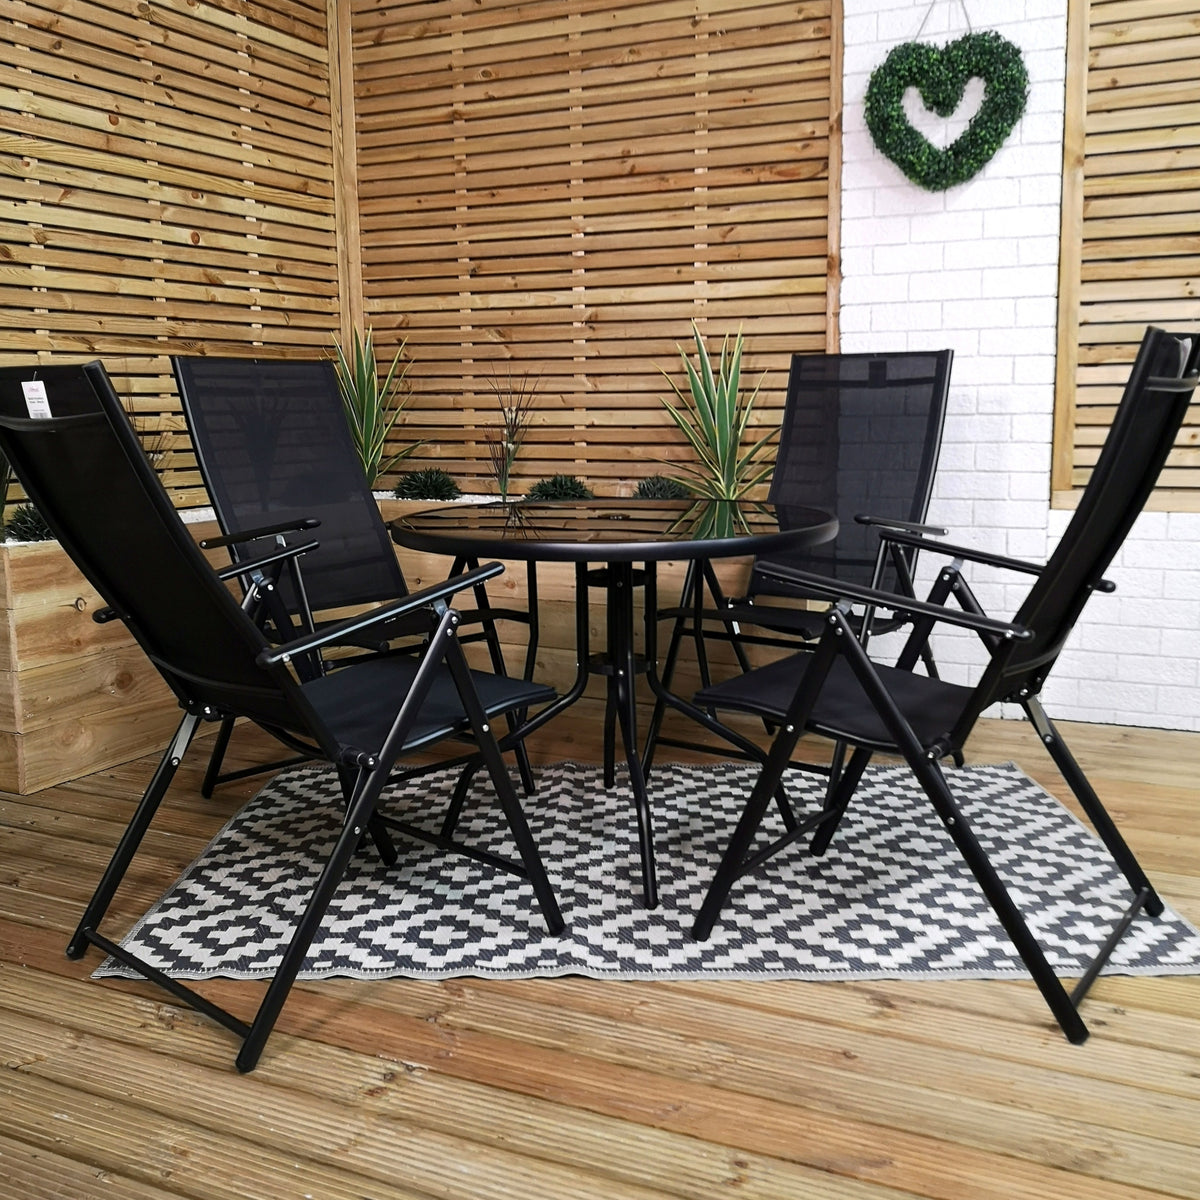 Outdoor 4 Person Round Glass Top Garden Patio Dining Table Chairs Set